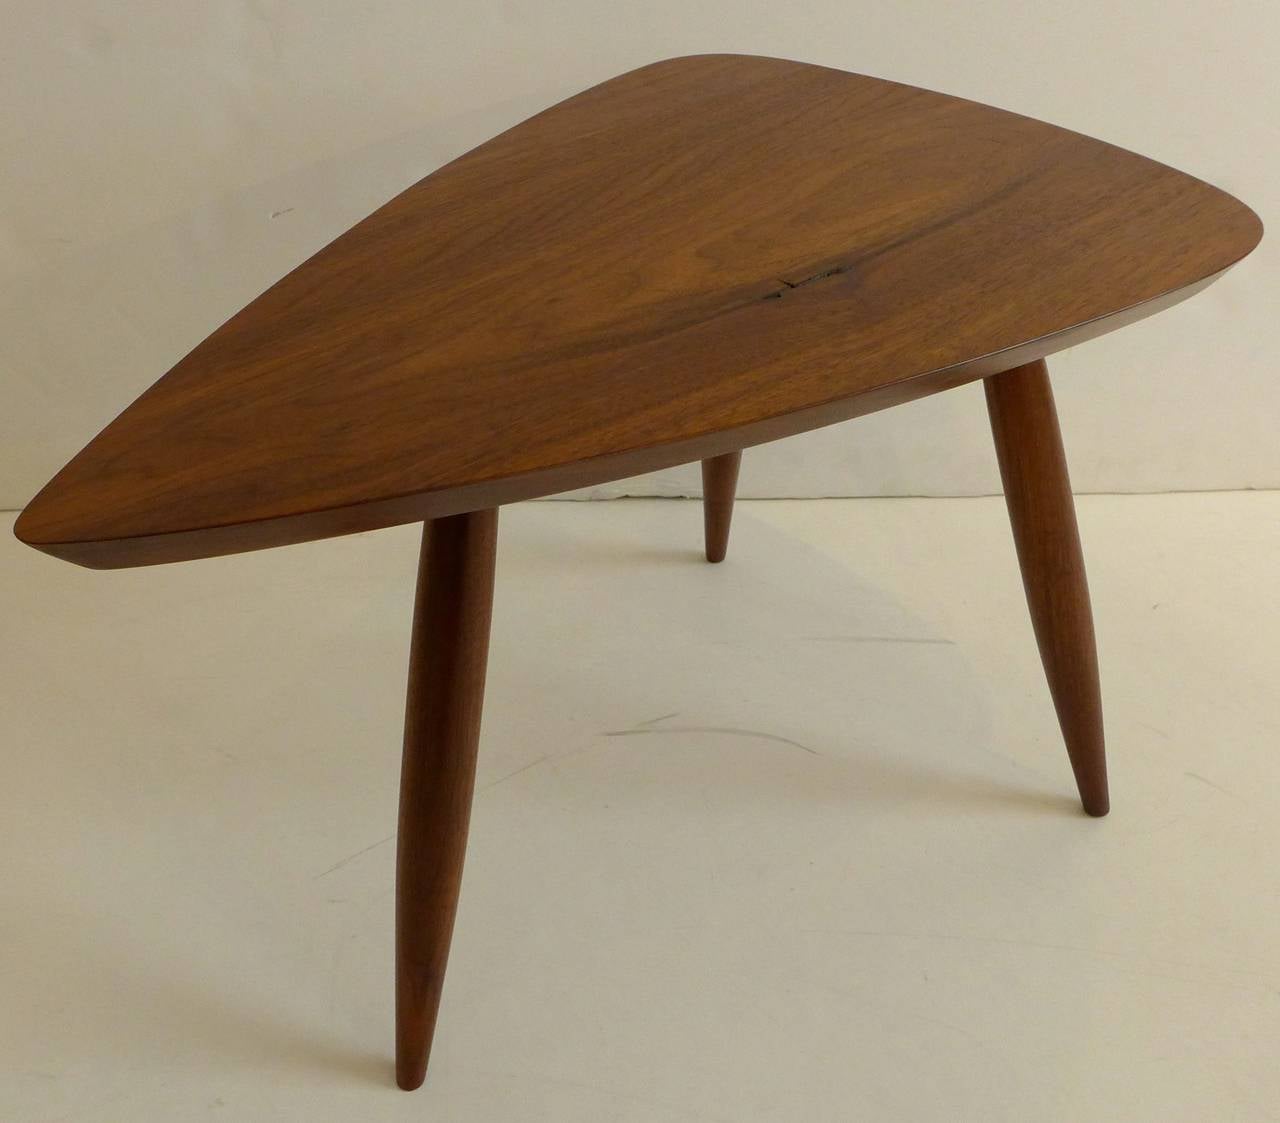 Guitar-pick shaped occasional table of American black walnut by New Hope craftsman Phillip Lloyd Powell. Beautifully grained top with one small inclusion. In excellent vintage condition with hand-rubbed oil finish.